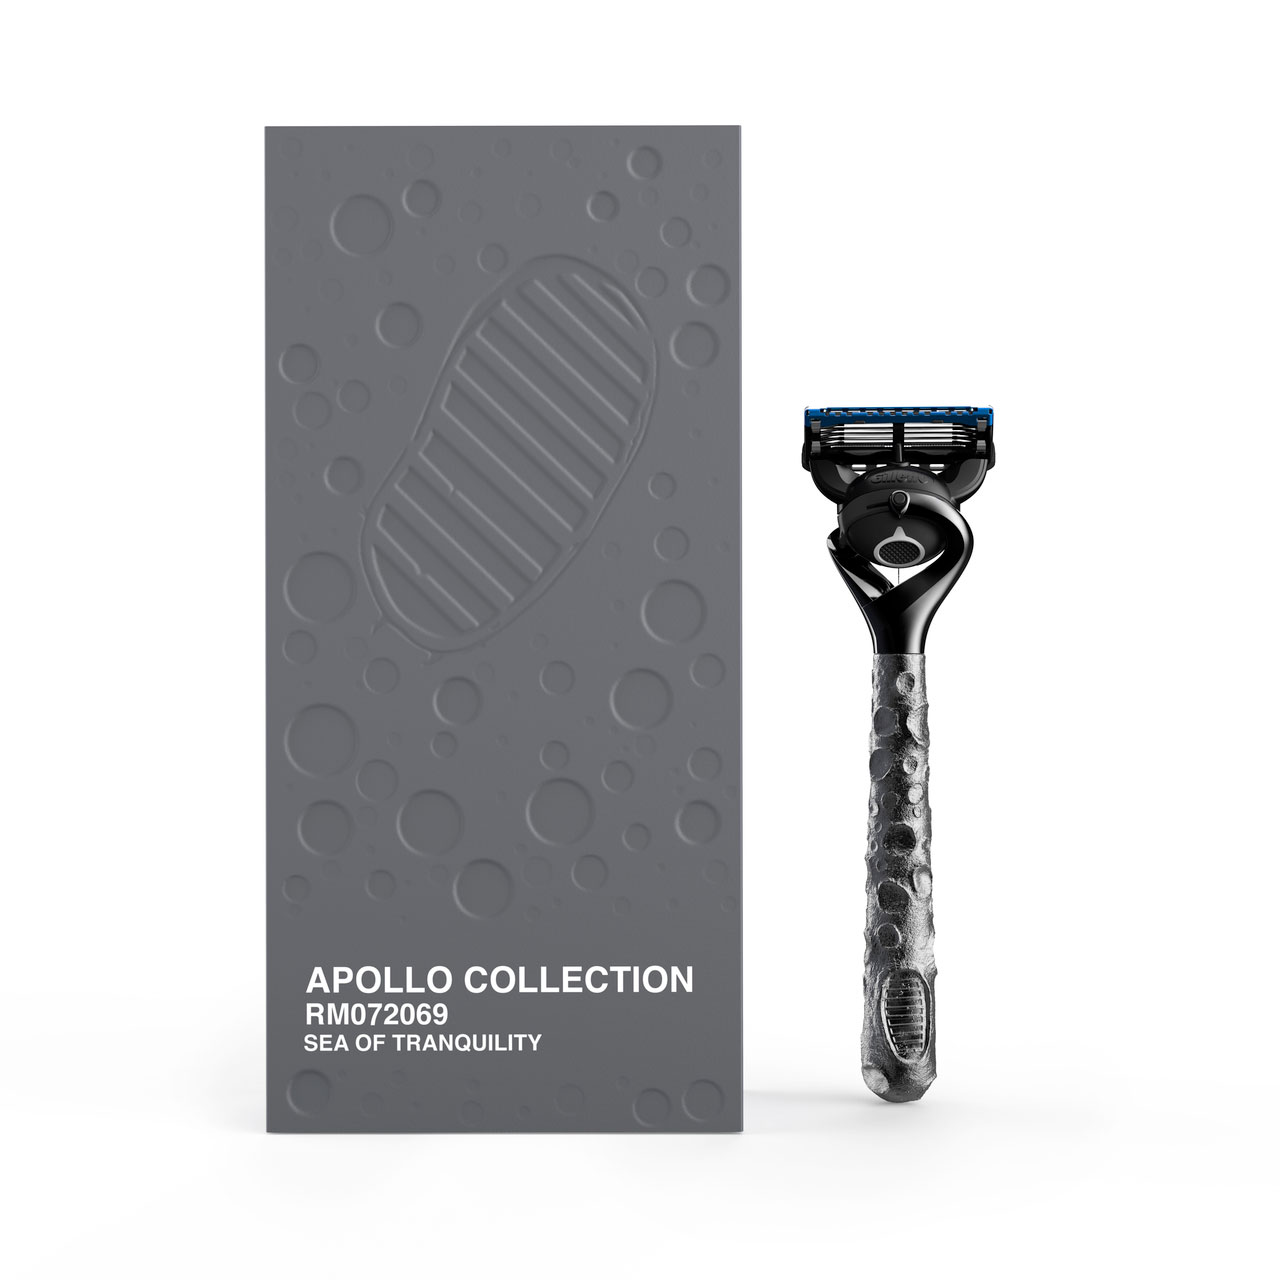 Gillette Apollo Collection Razor Inspired By First Moon Landing Mission Collectspace